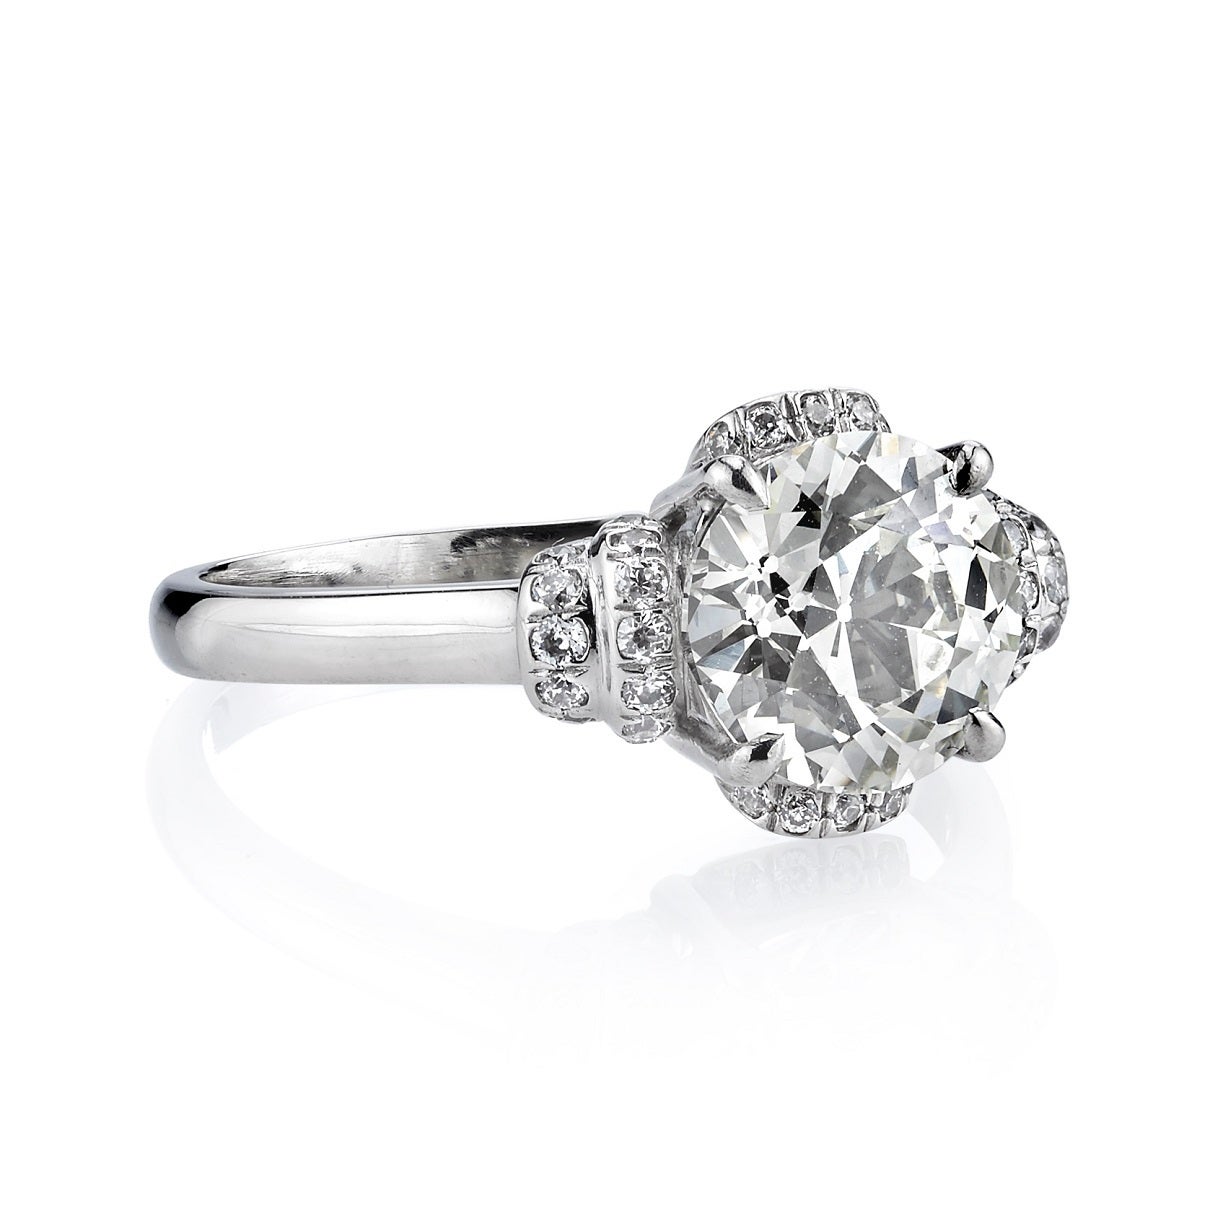 2.00ct L/VS1 EGL certified old European cut diamond set in a handcrafted platinum mounting. An Art Deco inspired design featuring a prong set diamond and diamond ribbon accents.